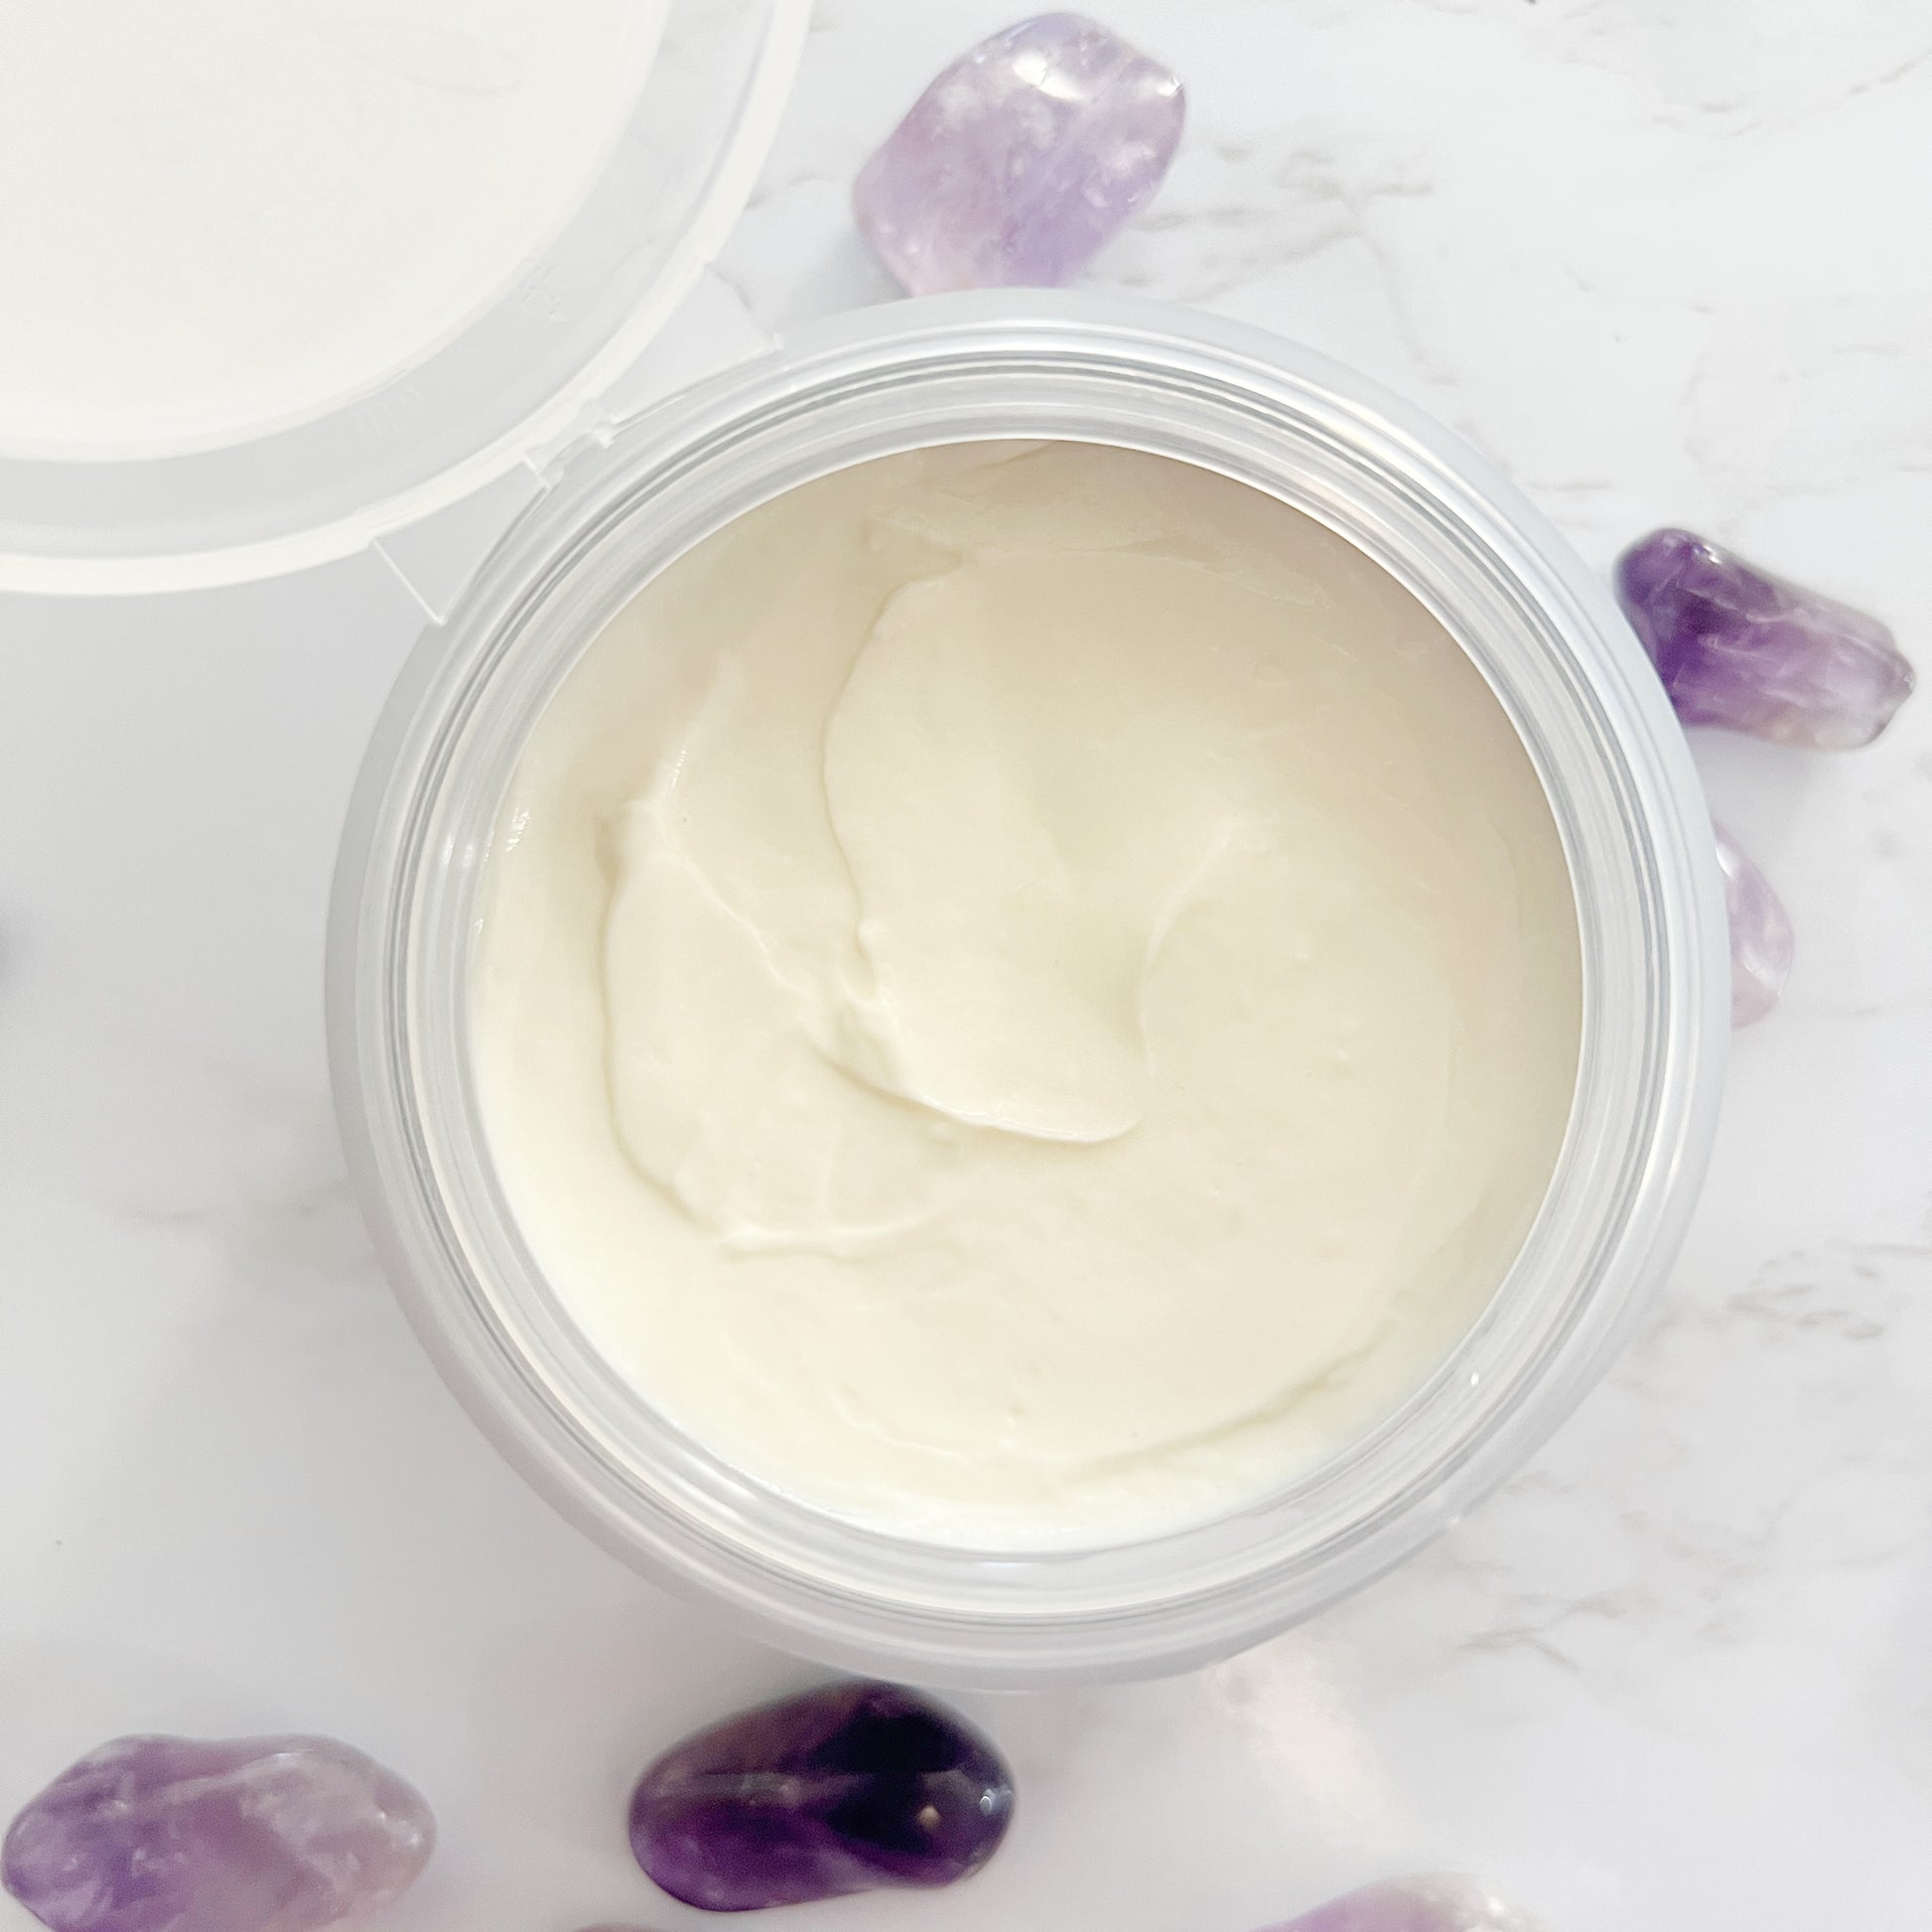 Body crème by Lather and Soul Skincare sits on white table with amethyst.